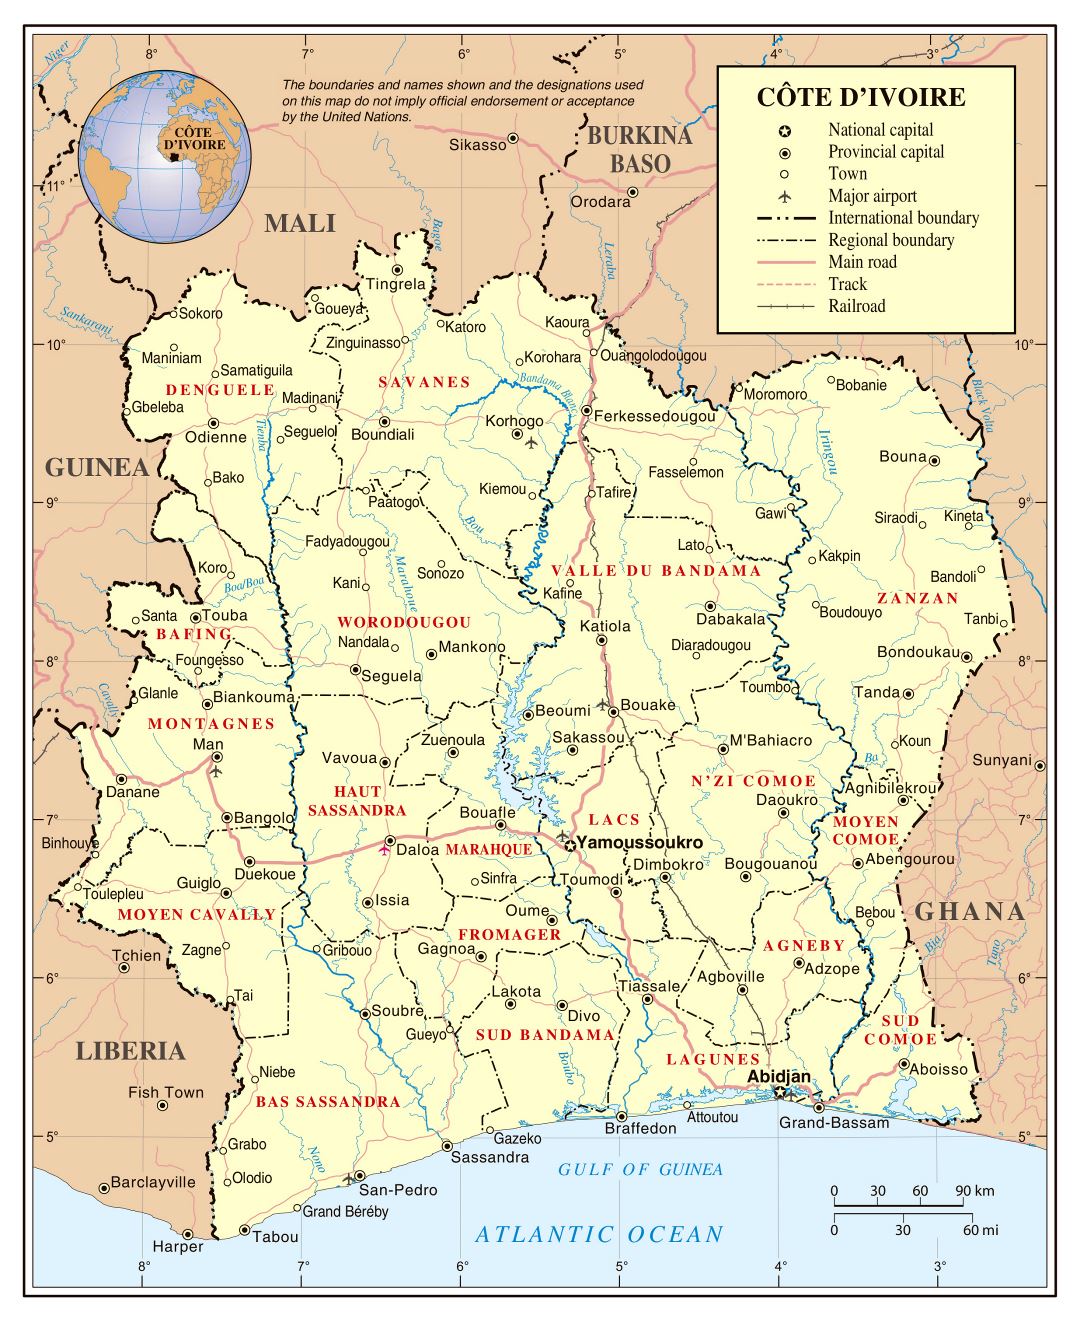 Large detailed political and administrative map of Cote d'Ivoire with roads, railroads, cities and airports